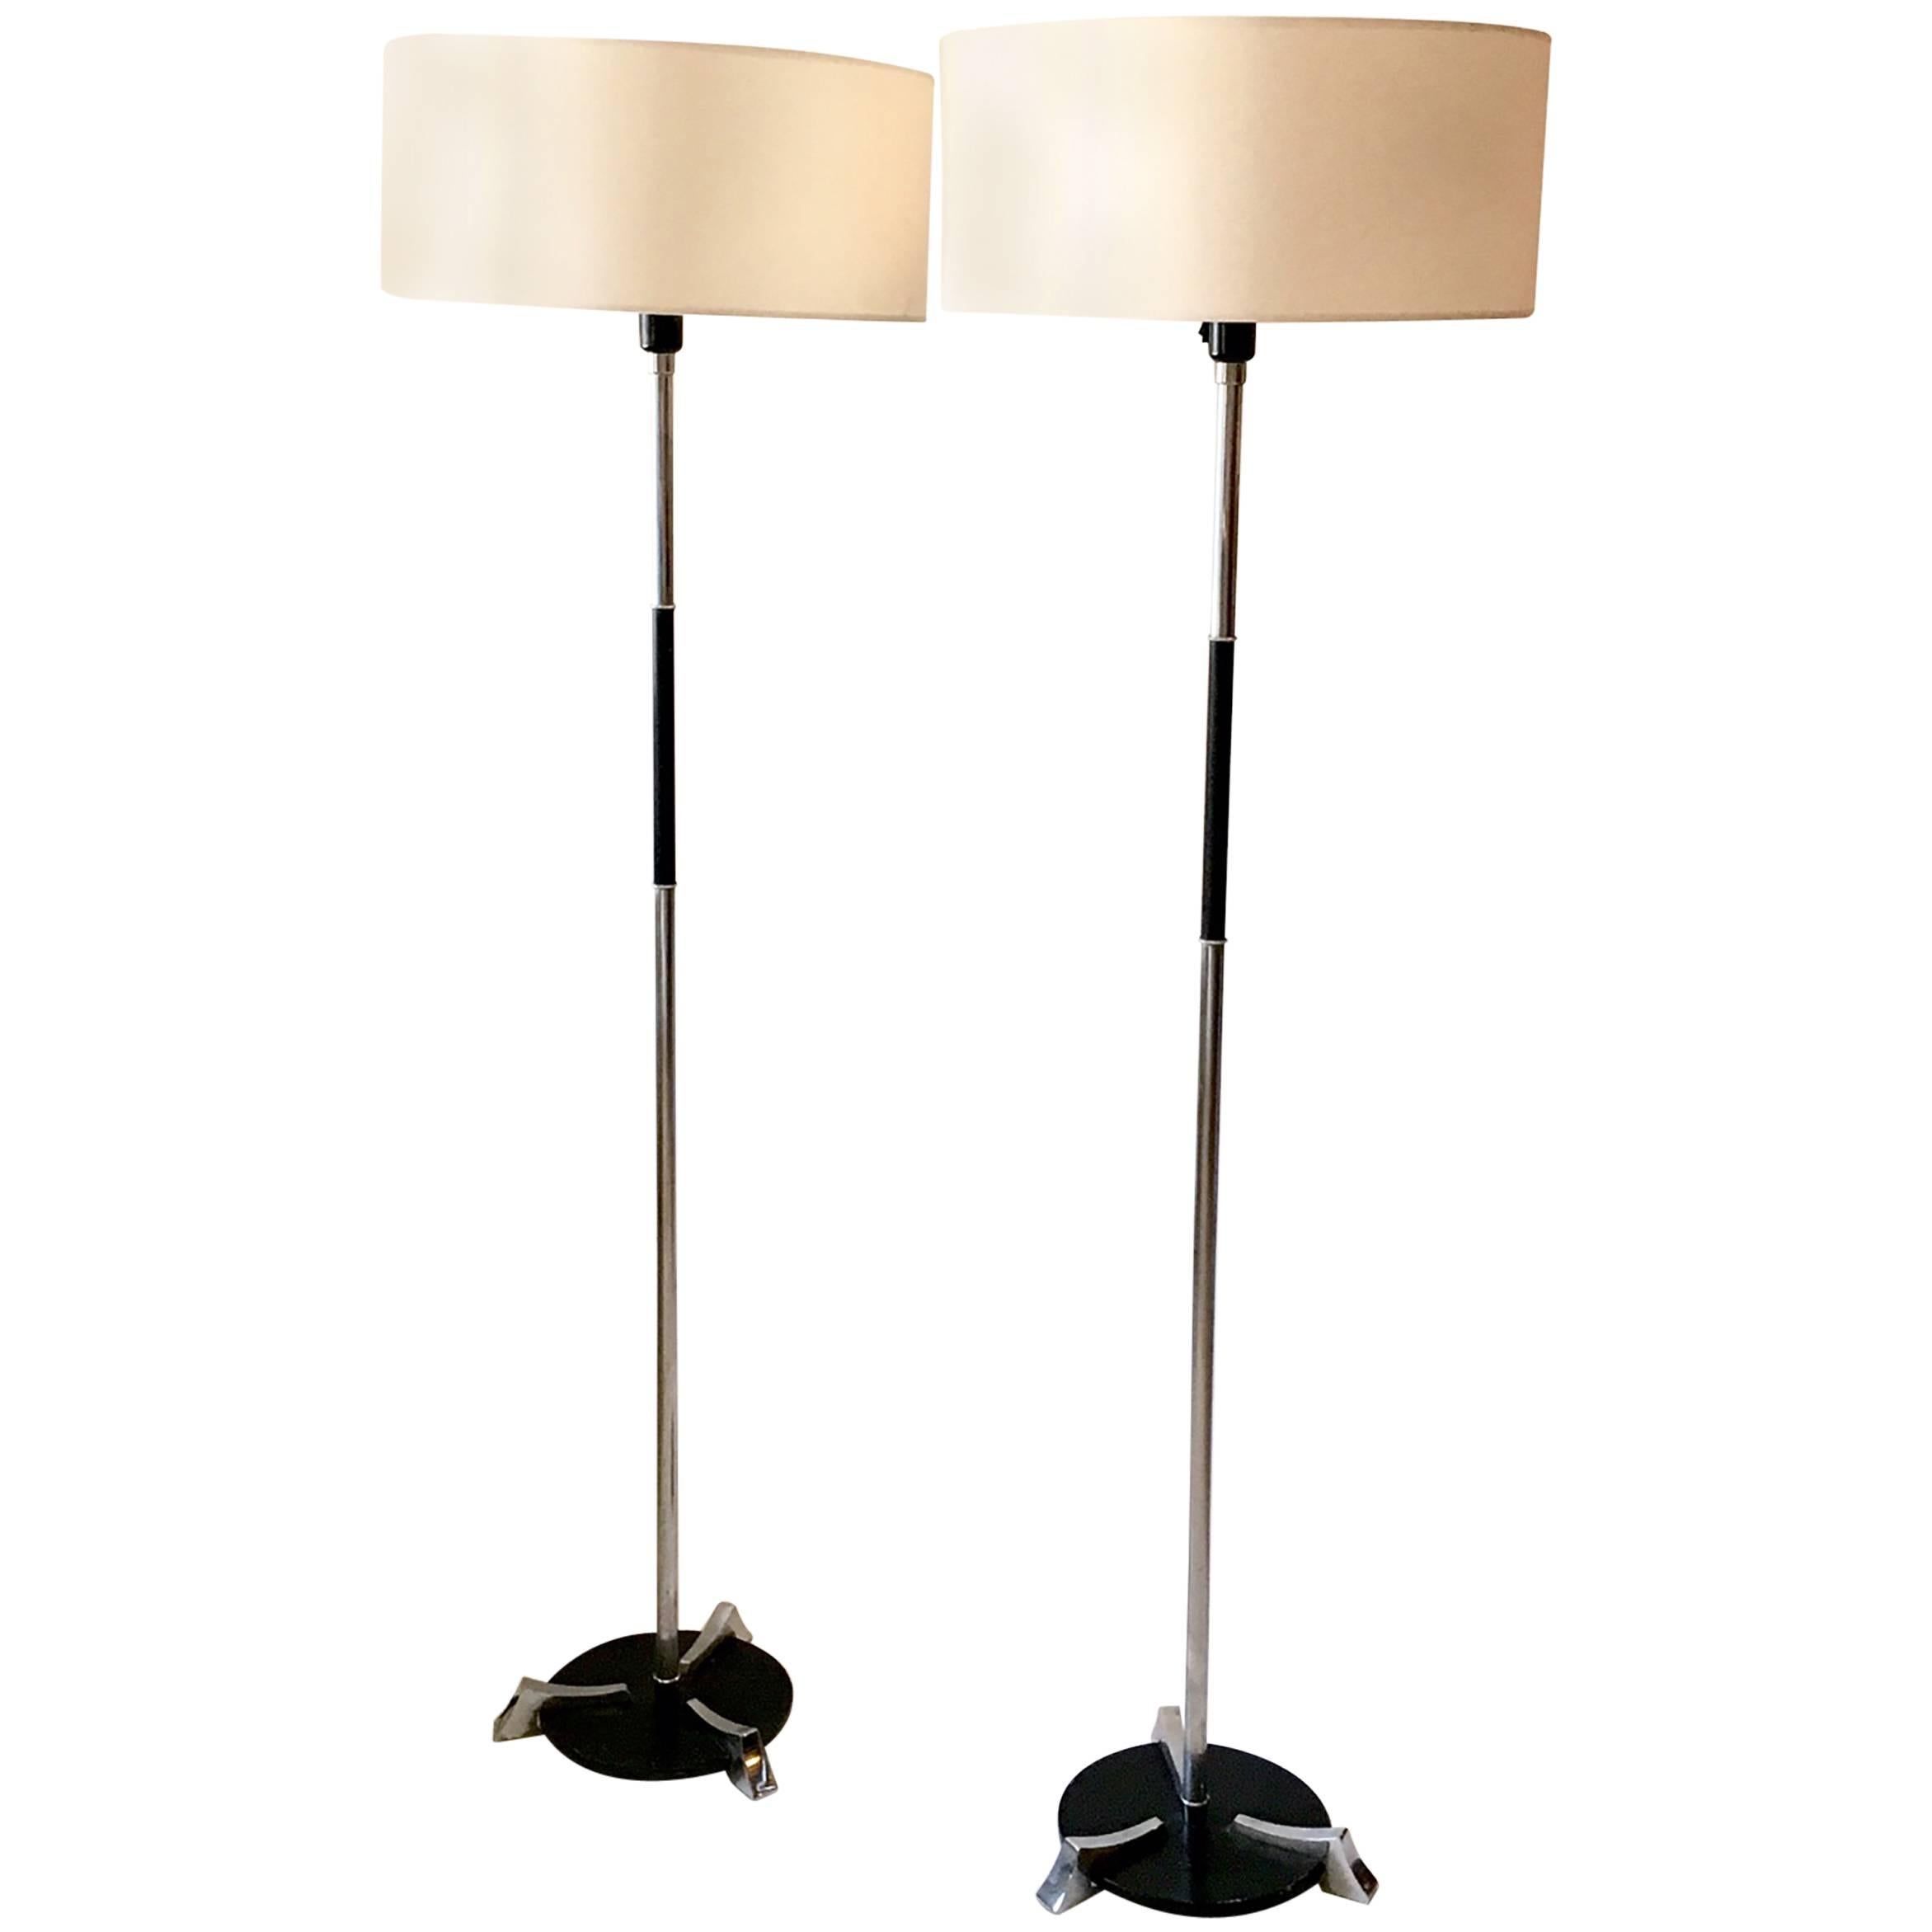 1970s Pair of Steel Chrome Lamps